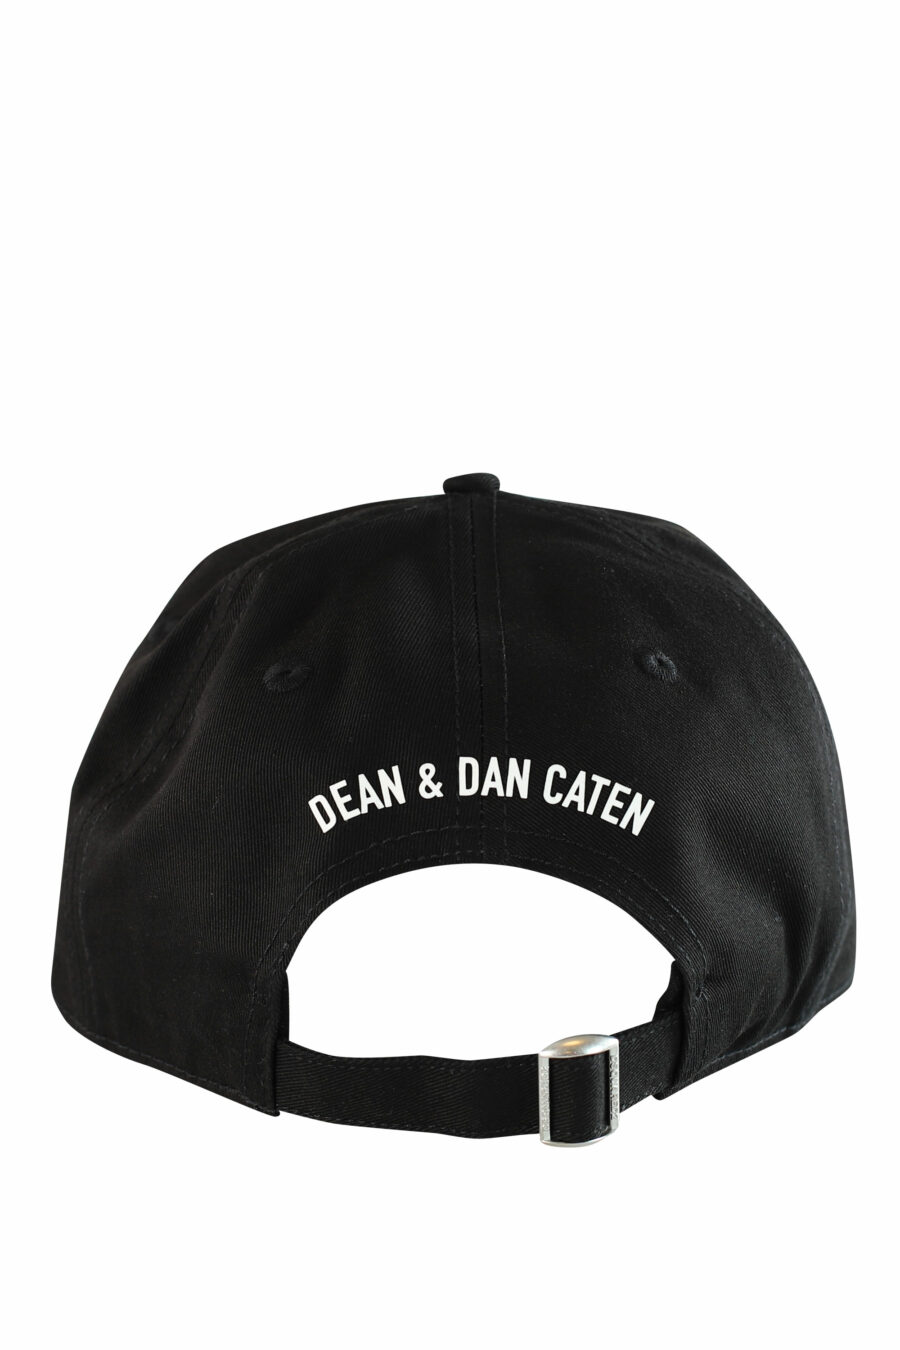 Dsquared2 - Black cap with double 